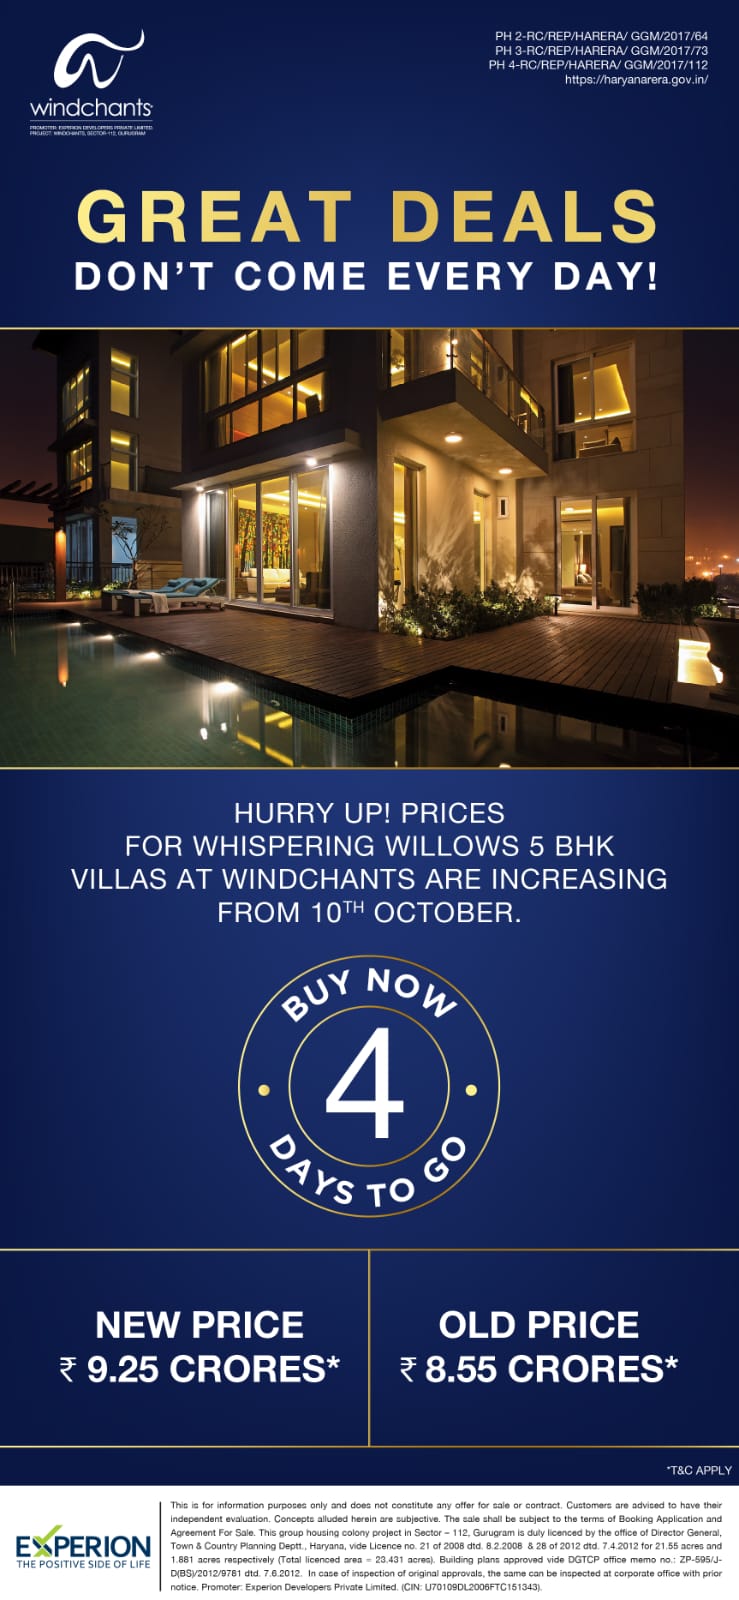 Hurry up prices for whispering willows 5 BHK villas at Experion Windchants are increasing from 10th October. Update